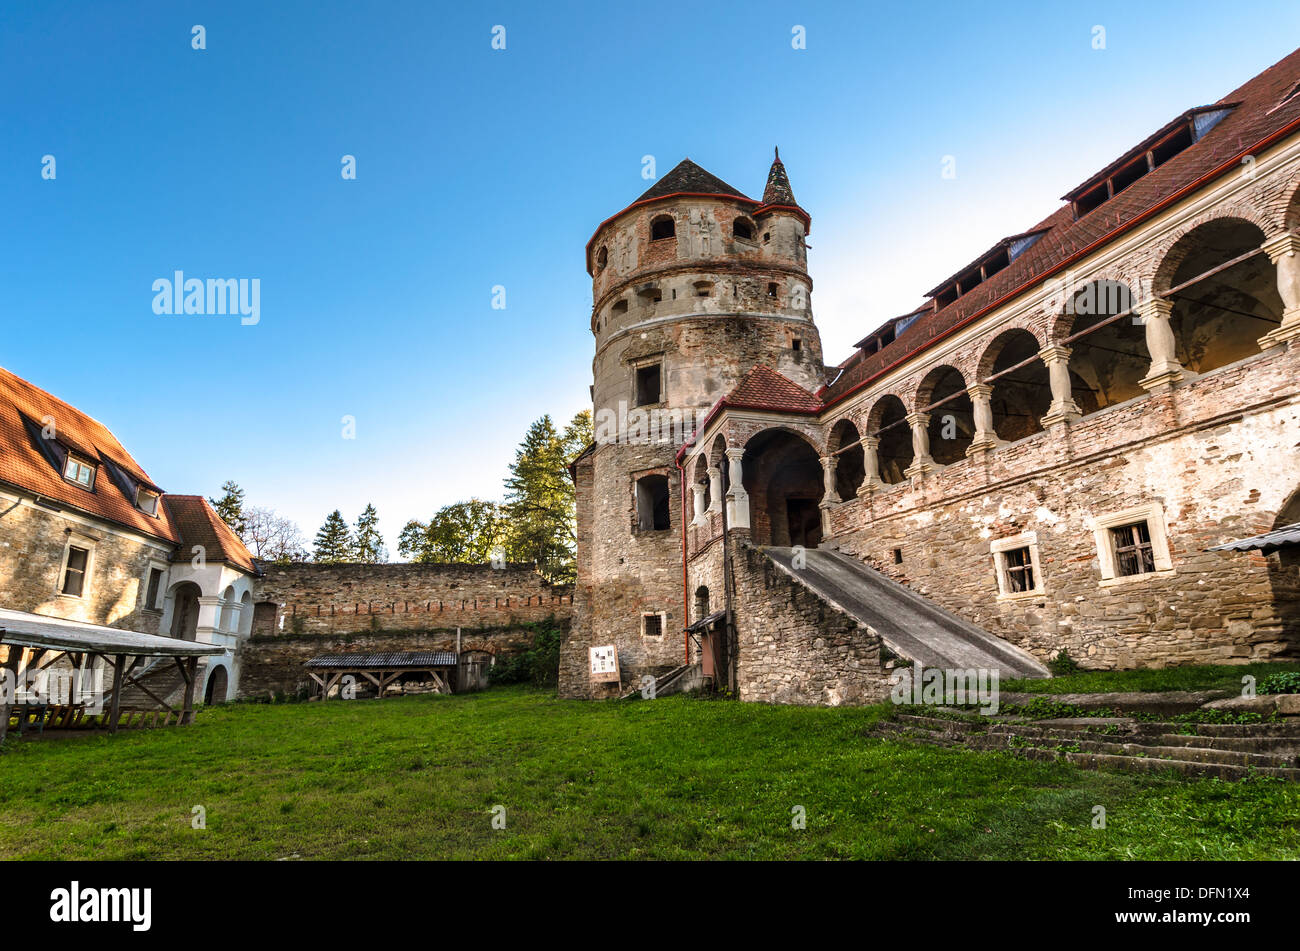 Renovation of an old castle - The Bethlen Castle, built between 14th-17th centuries. Stock Photo